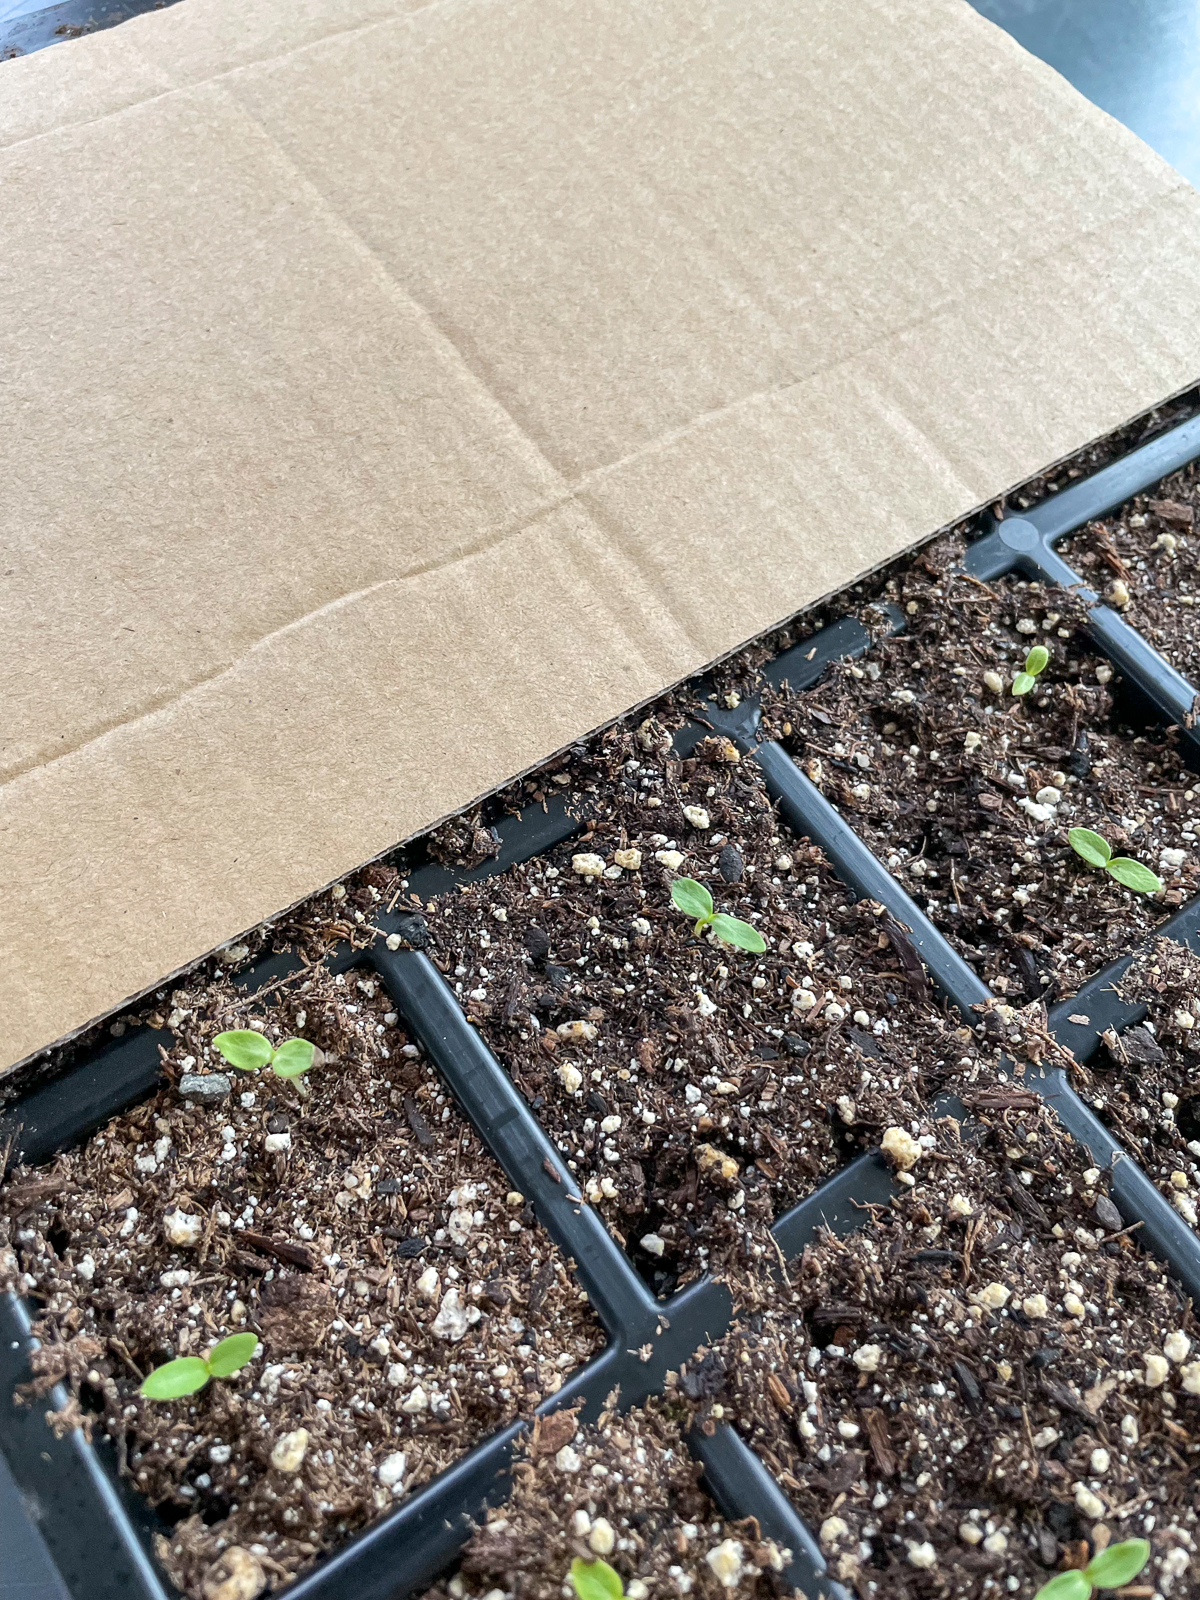 covering phlox seeds with cardboard to provide darkness until germination